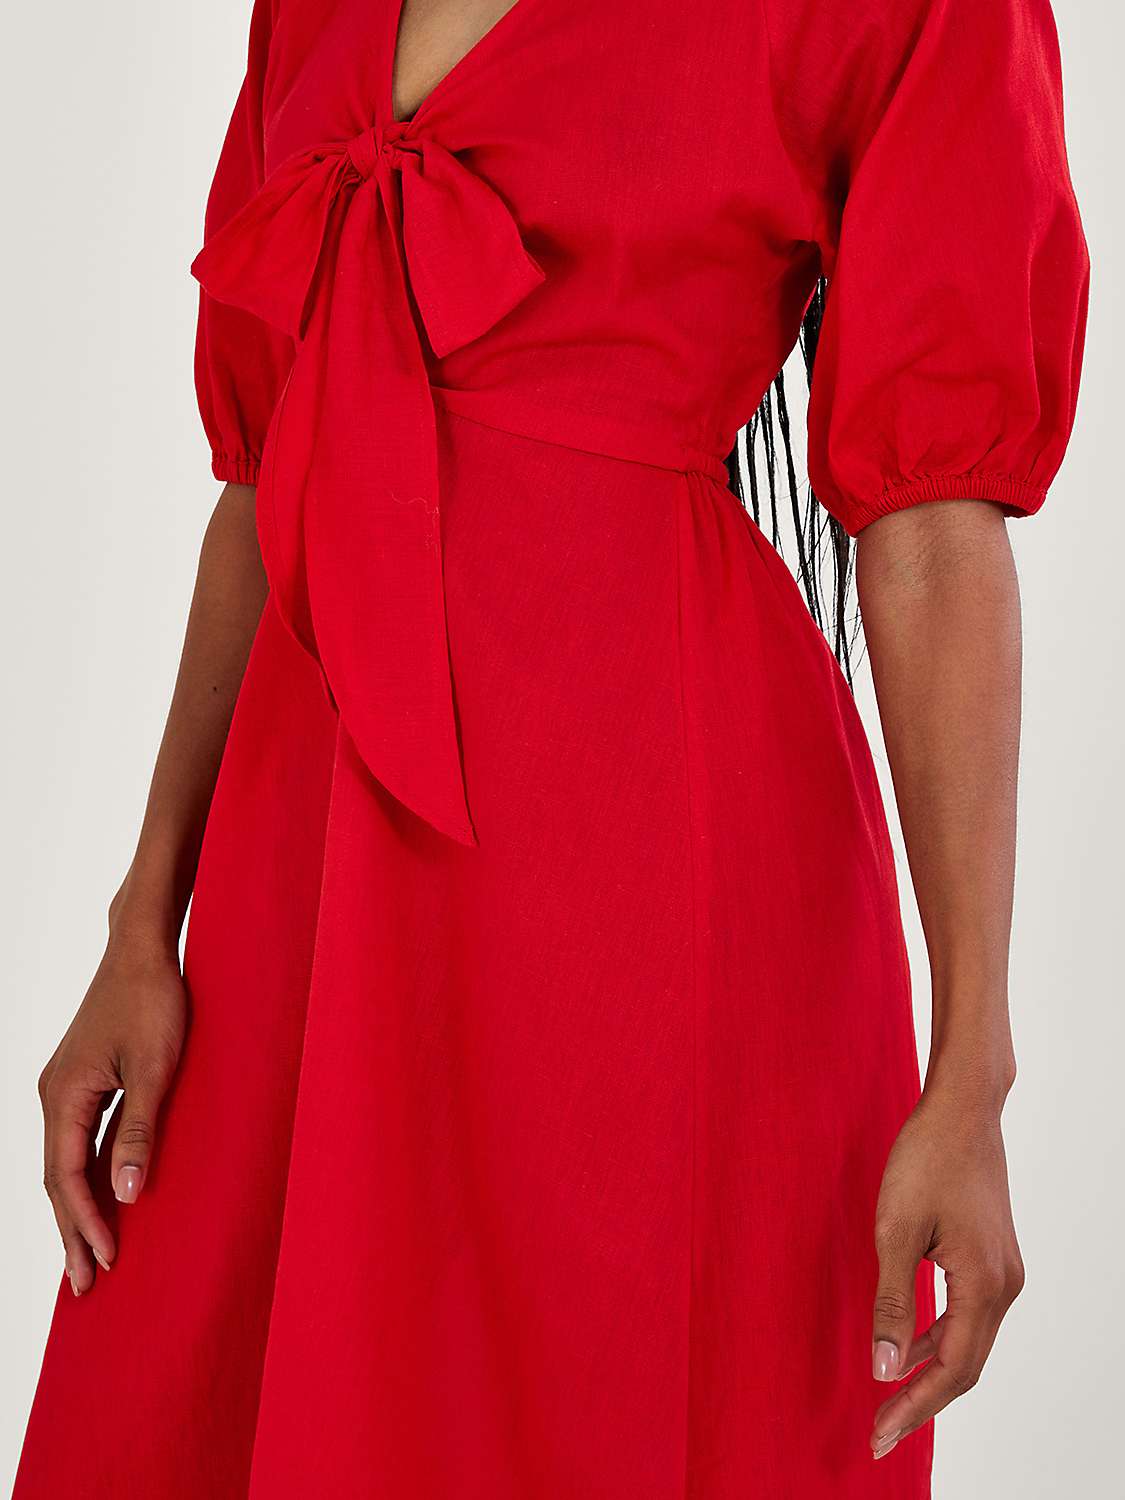 Buy Monsoon Tie Front Midi Dress, Red Online at johnlewis.com